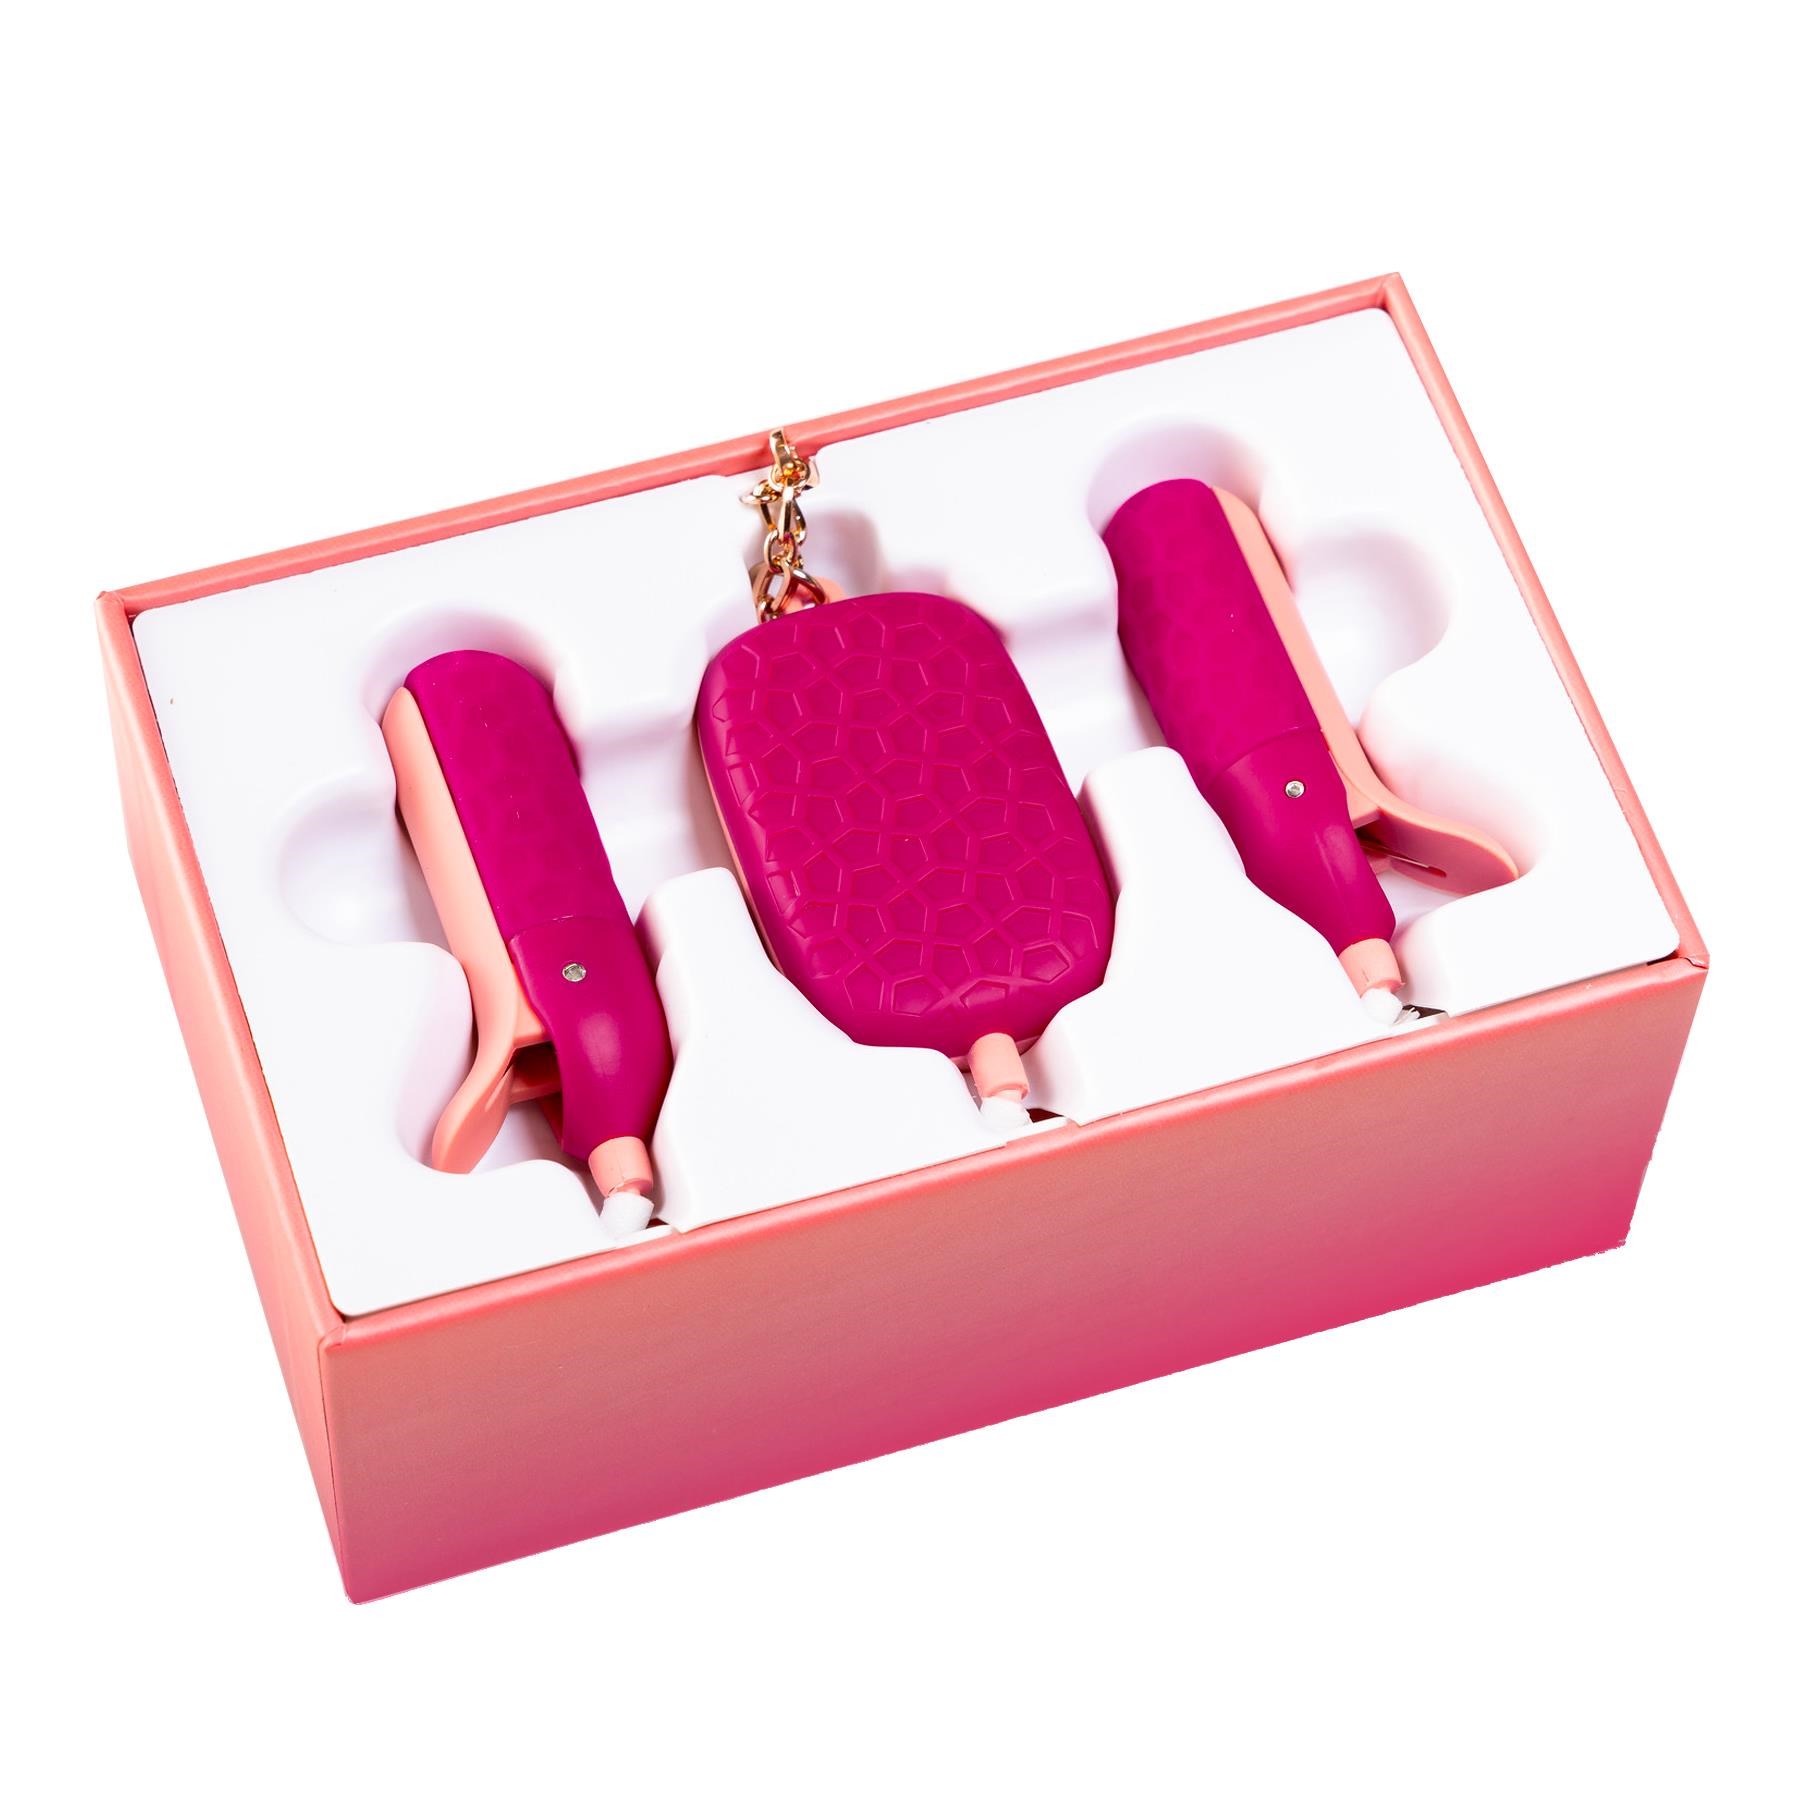 Lovelife Sphinx Vibrating Nipple Clamps - Product in Open Box